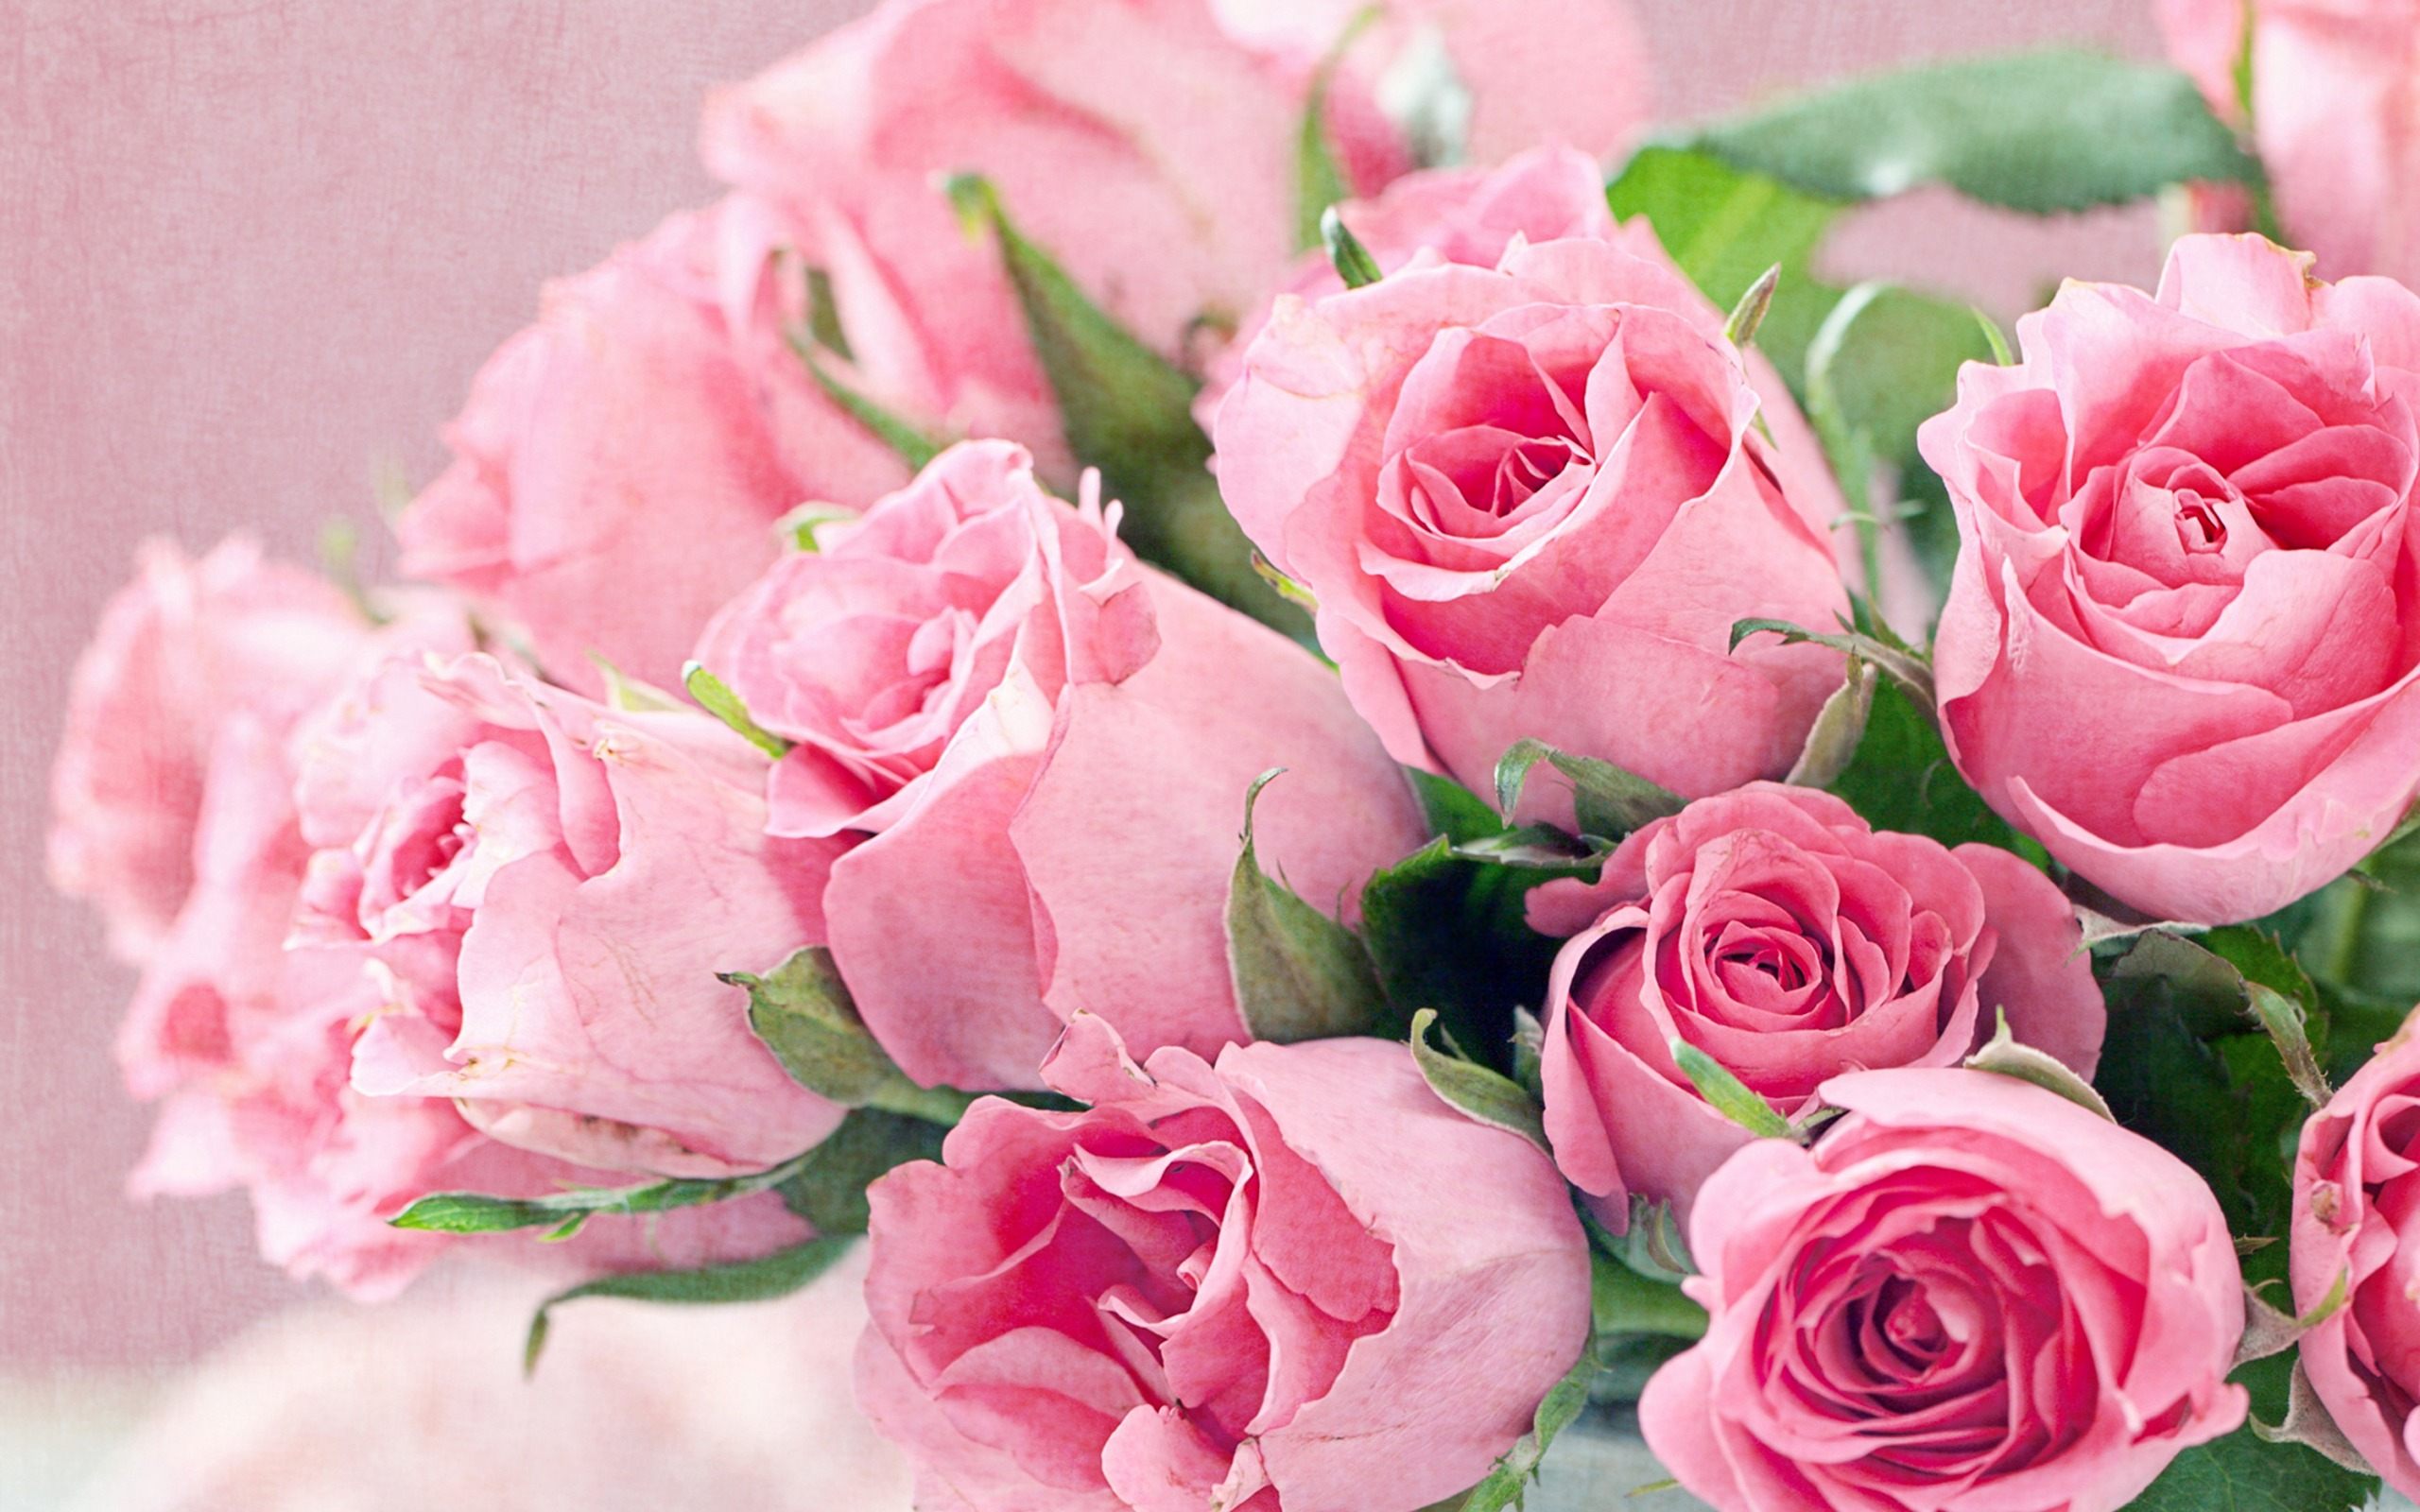 Fresh Flowers Bouquet Of Pink Roses Hd Desktop Backgrounds Free ...